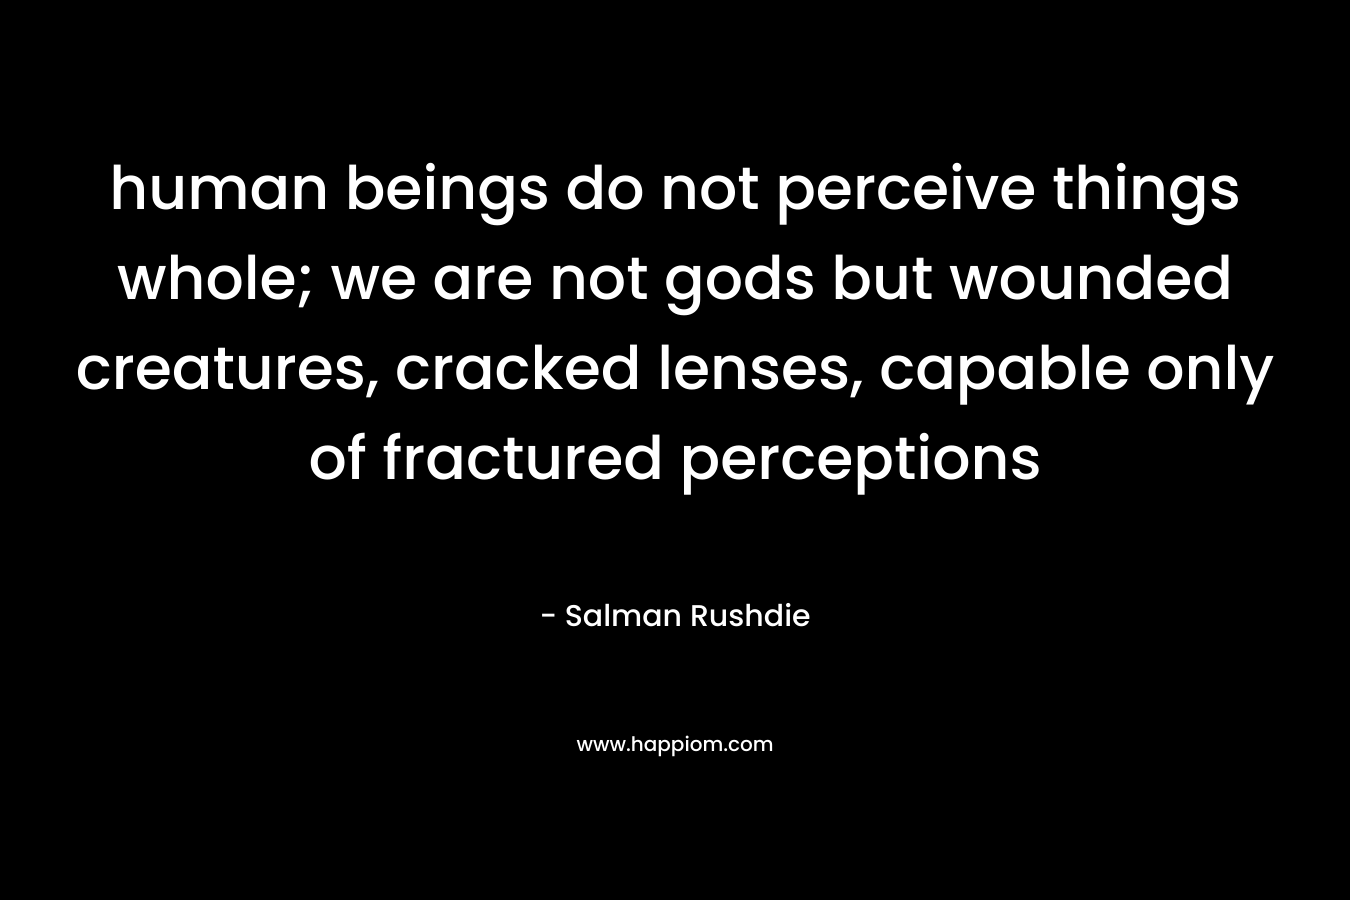 human beings do not perceive things whole; we are not gods but wounded creatures, cracked lenses, capable only of fractured perceptions